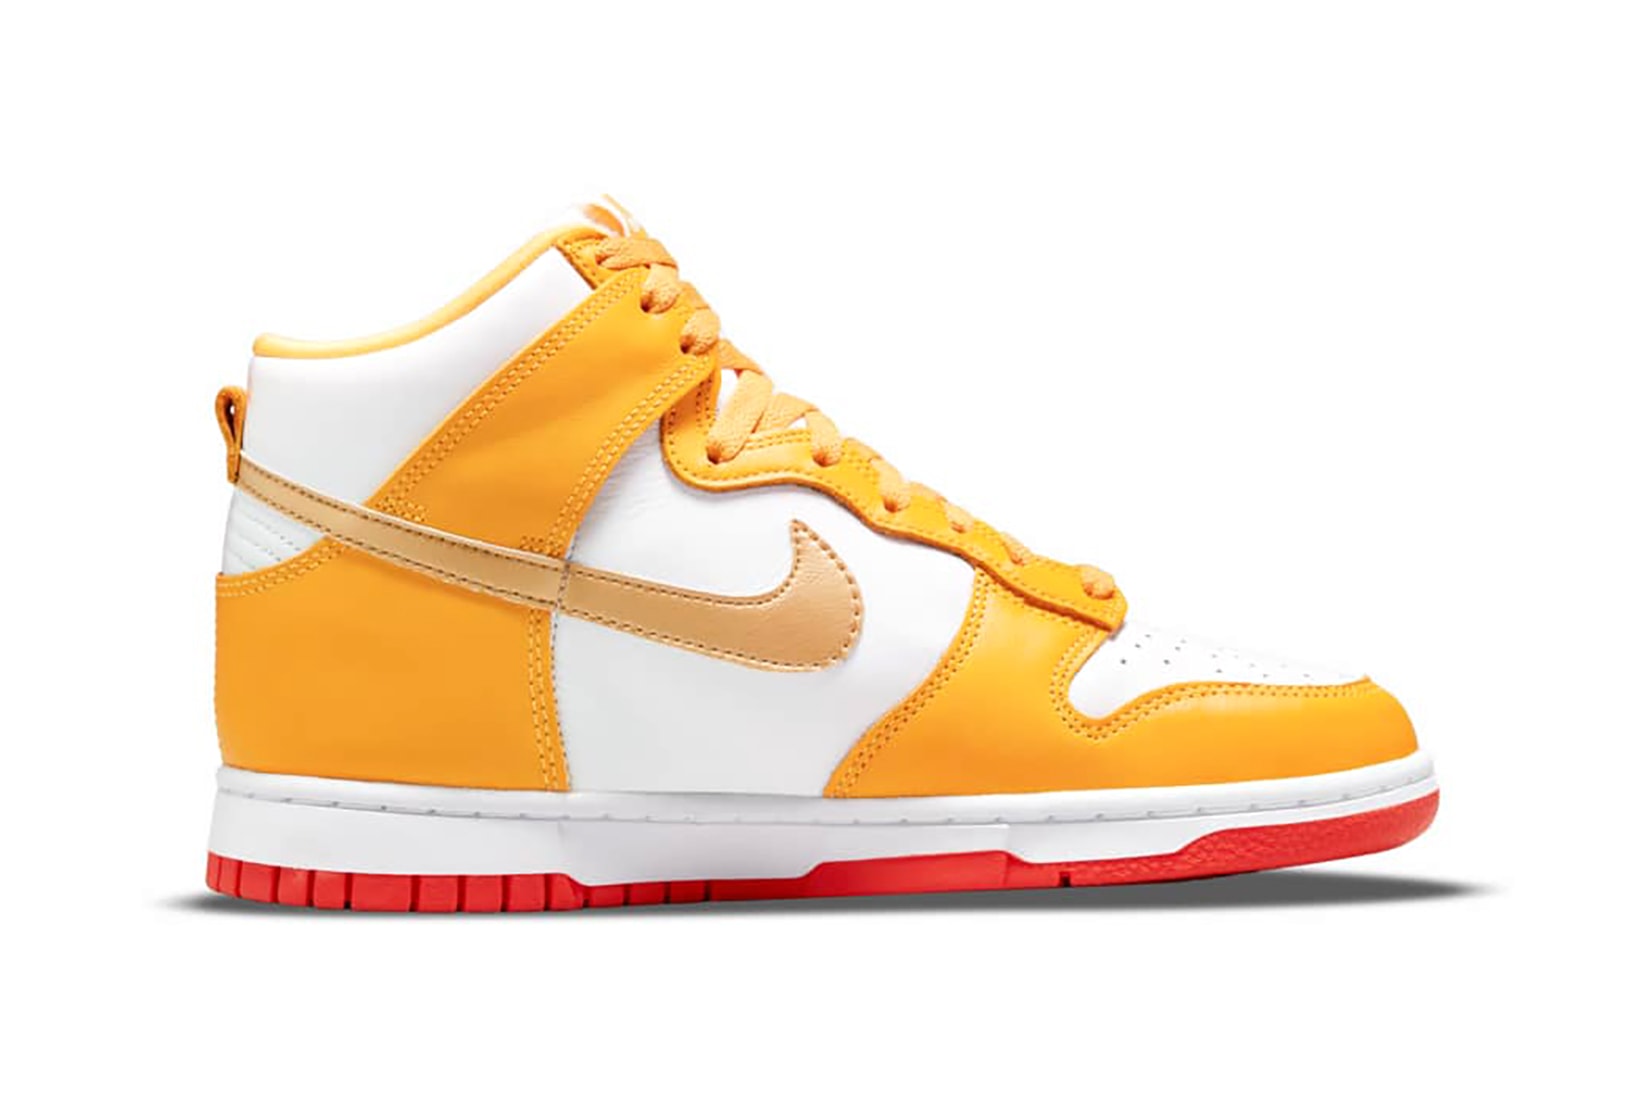 Nike Womens Dunk High University Gold Yellow White Sneakers Footwear Shoes Kicks Lateral